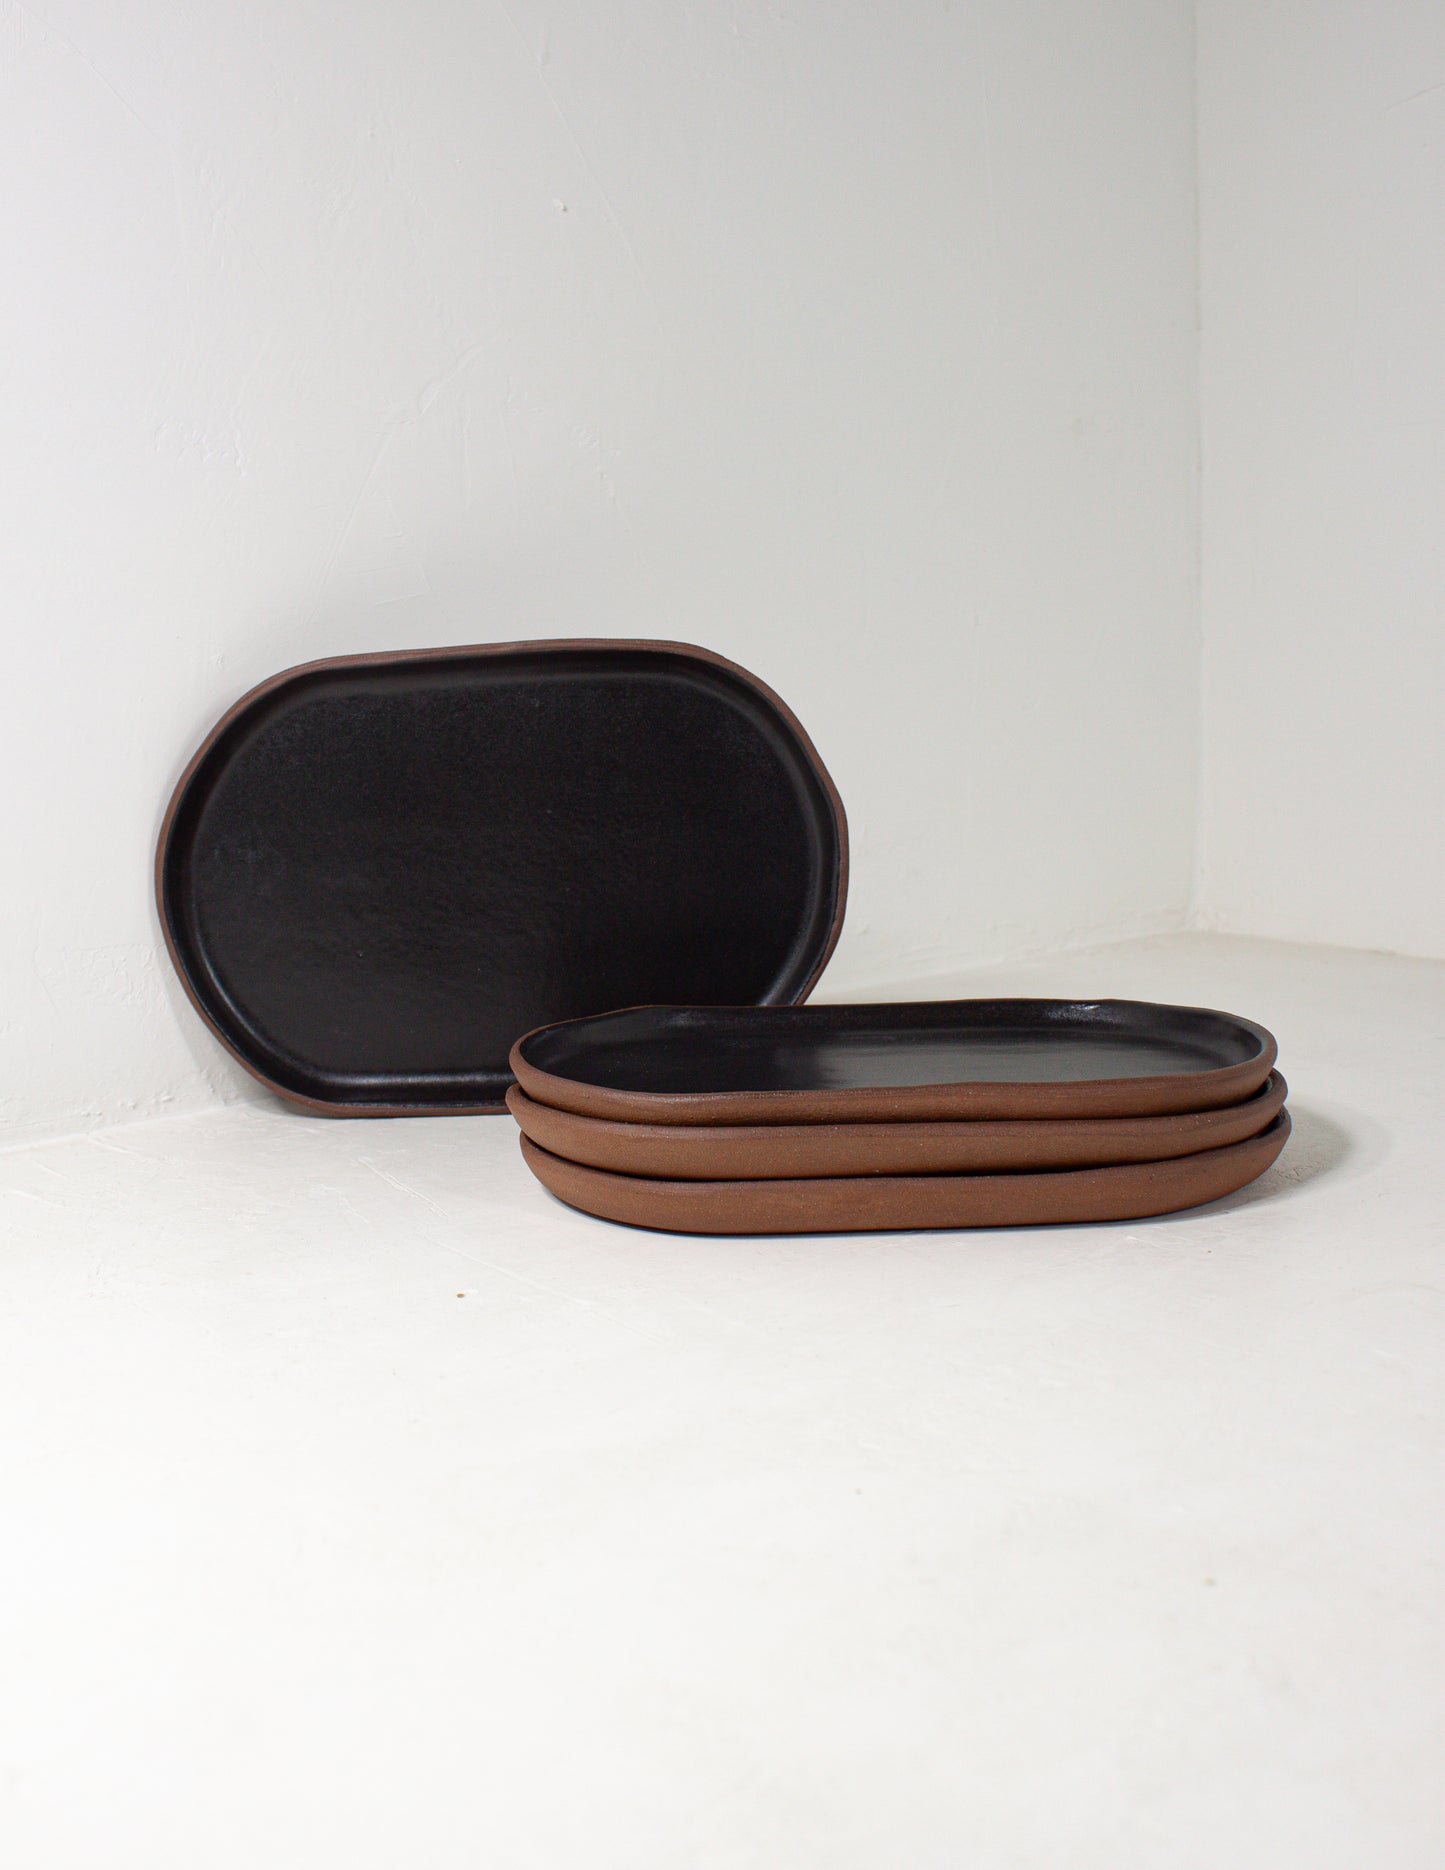 handmade serving dish in the shape of a small oval in black glaze